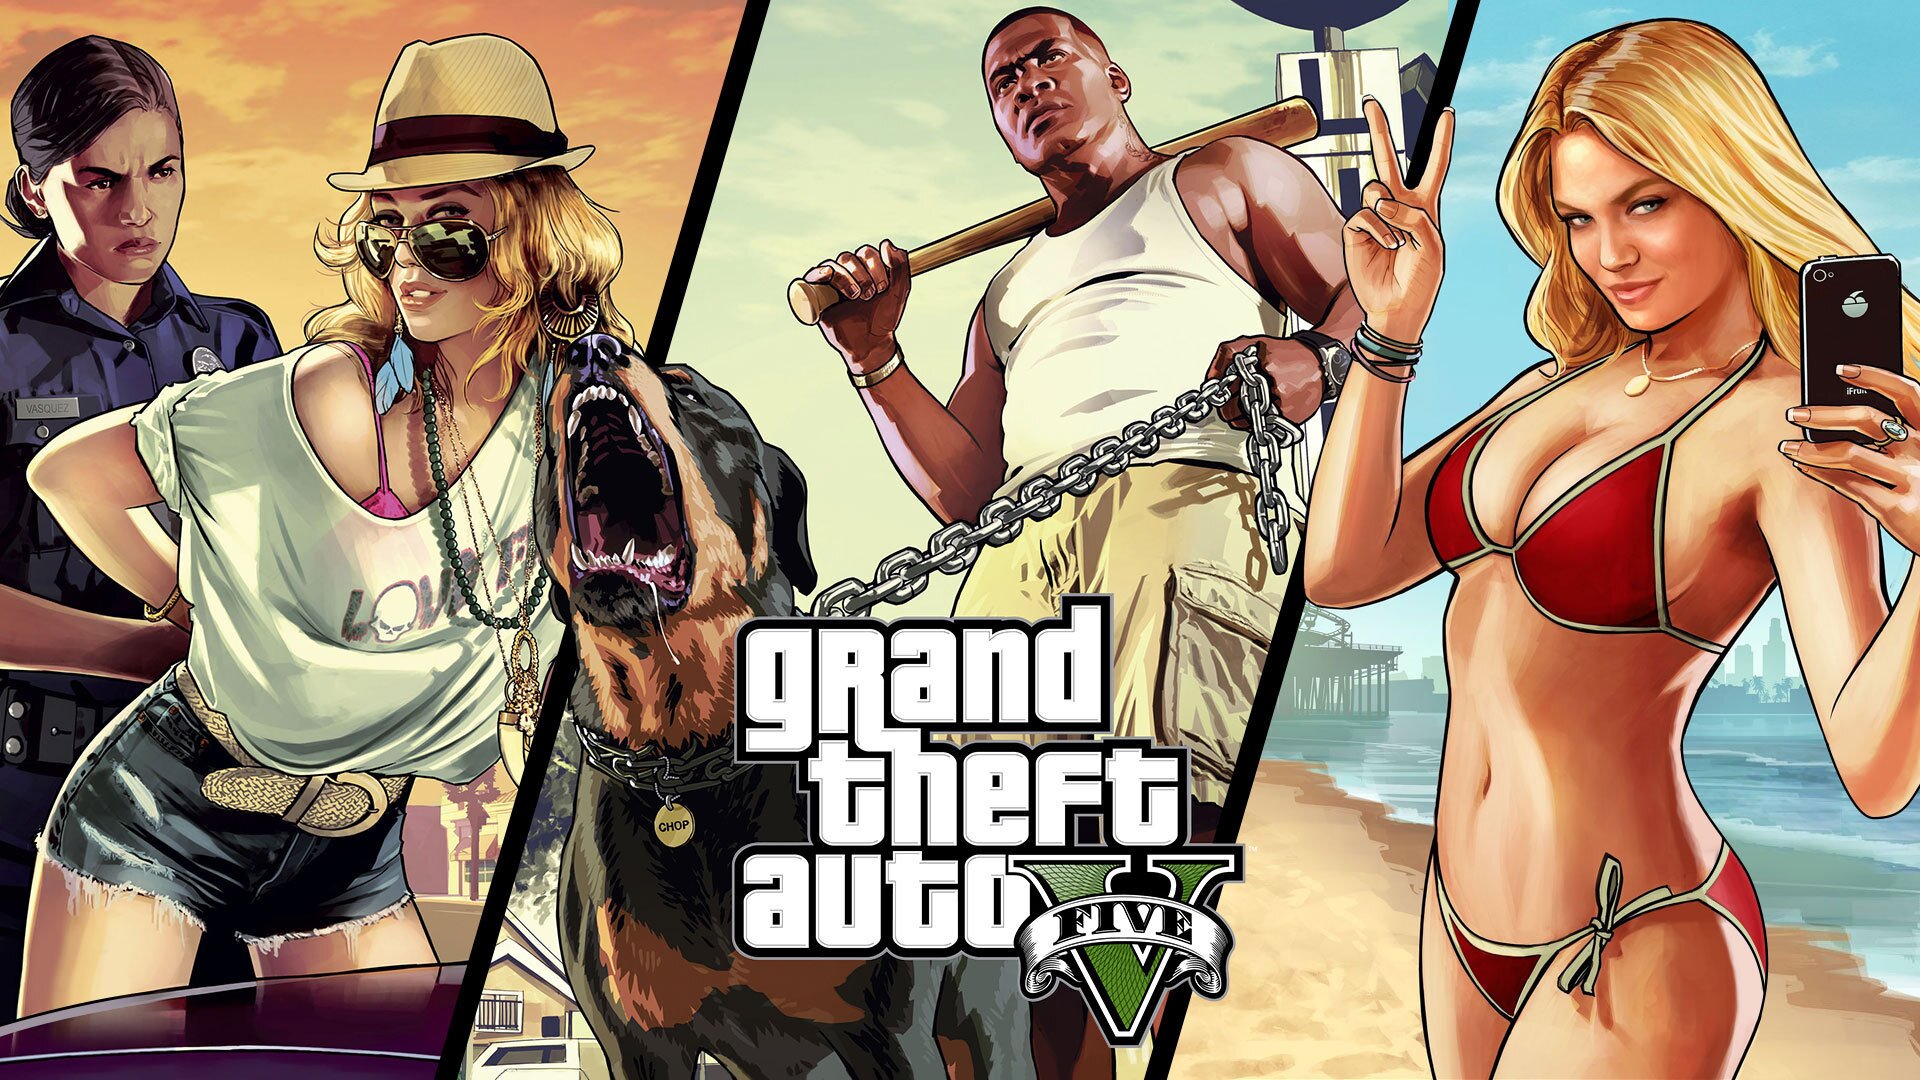 Everyone please ask me what ever you want to know about gta 5 so don't be scared just ask me any thing